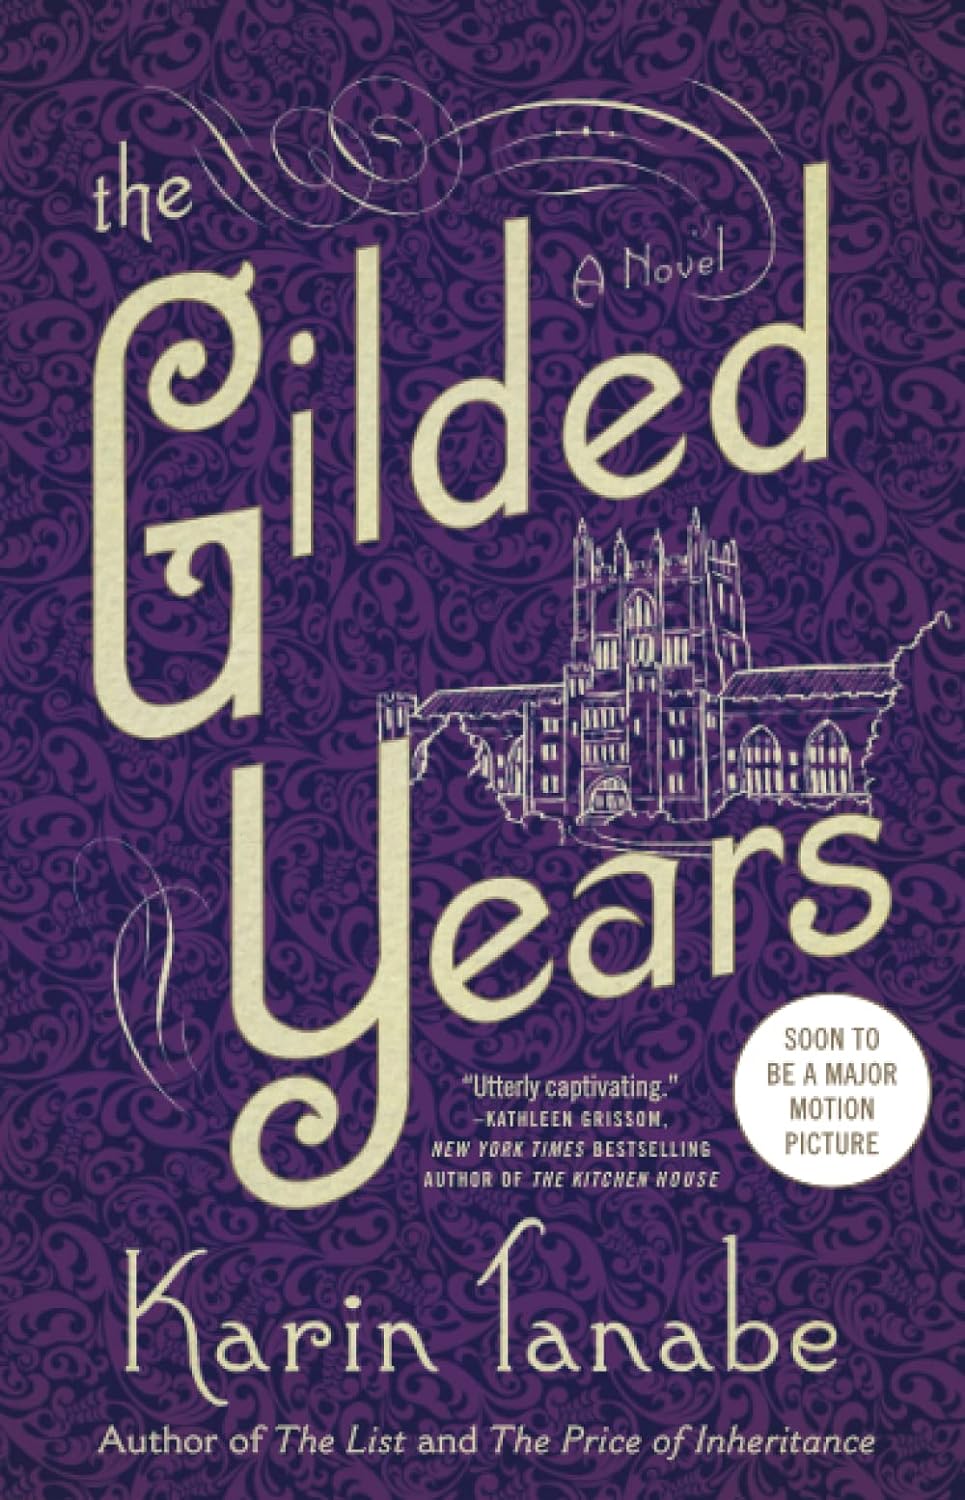 book cover of The Gilded Years by Karin Tanabe. Purple with light yellow words. The outline of a school in the background.